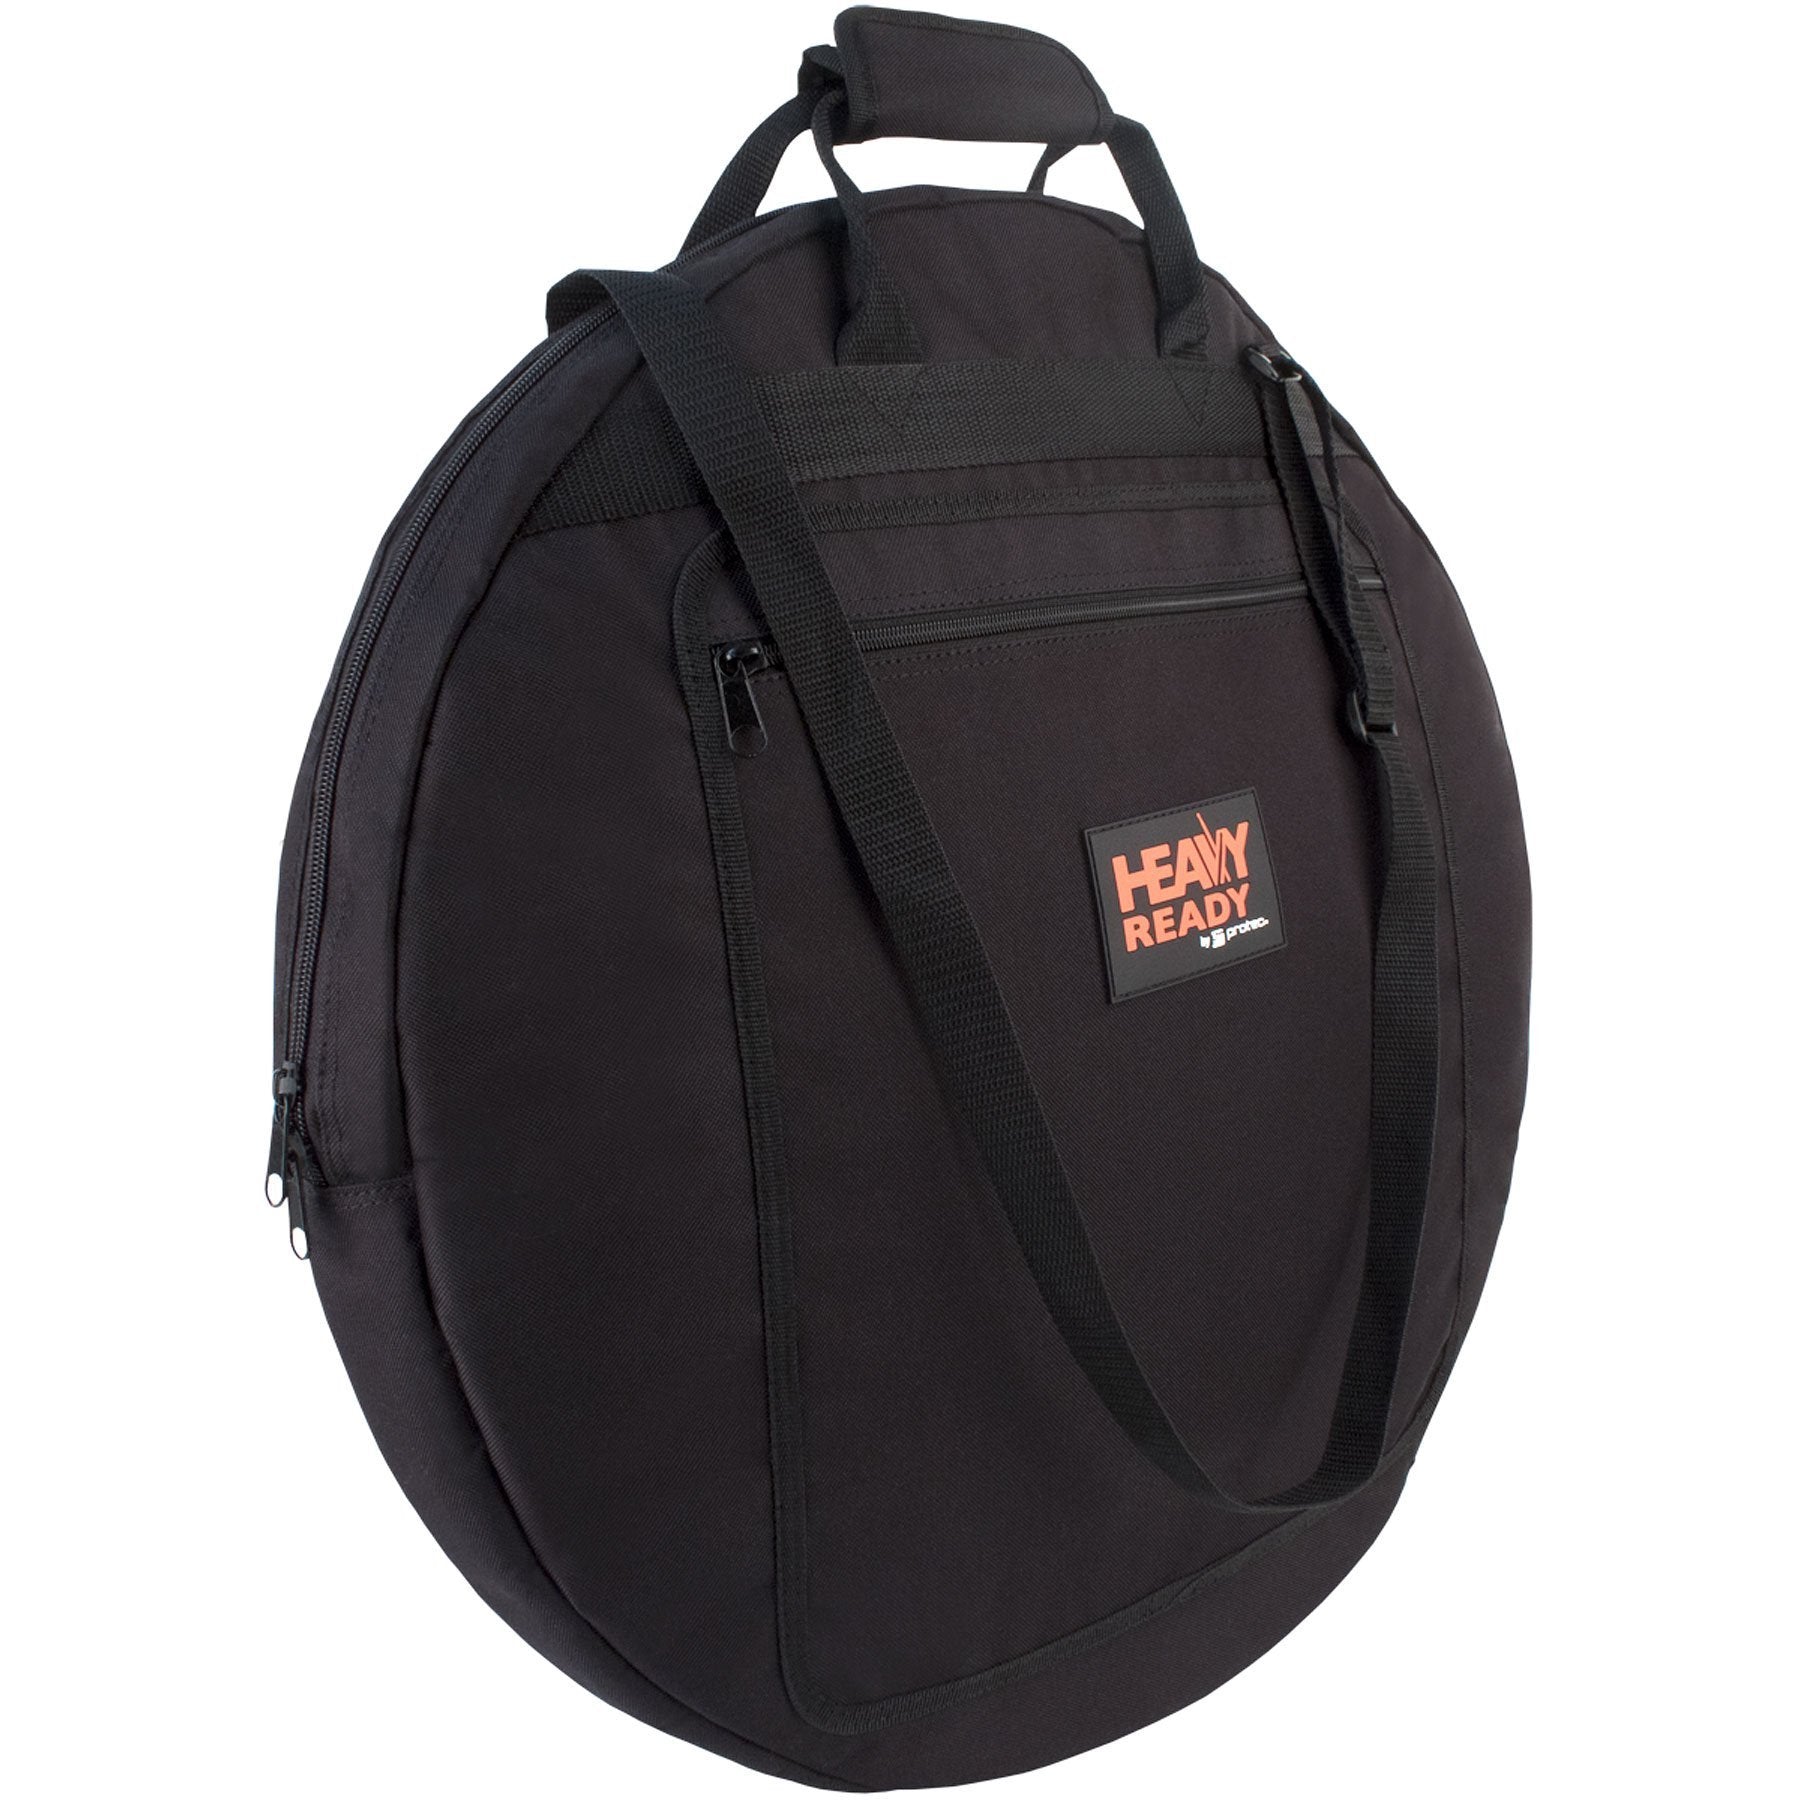 Protec - 22" Cymbal Bag (Heavy Ready Series)-Percussion-Protec-Music Elements